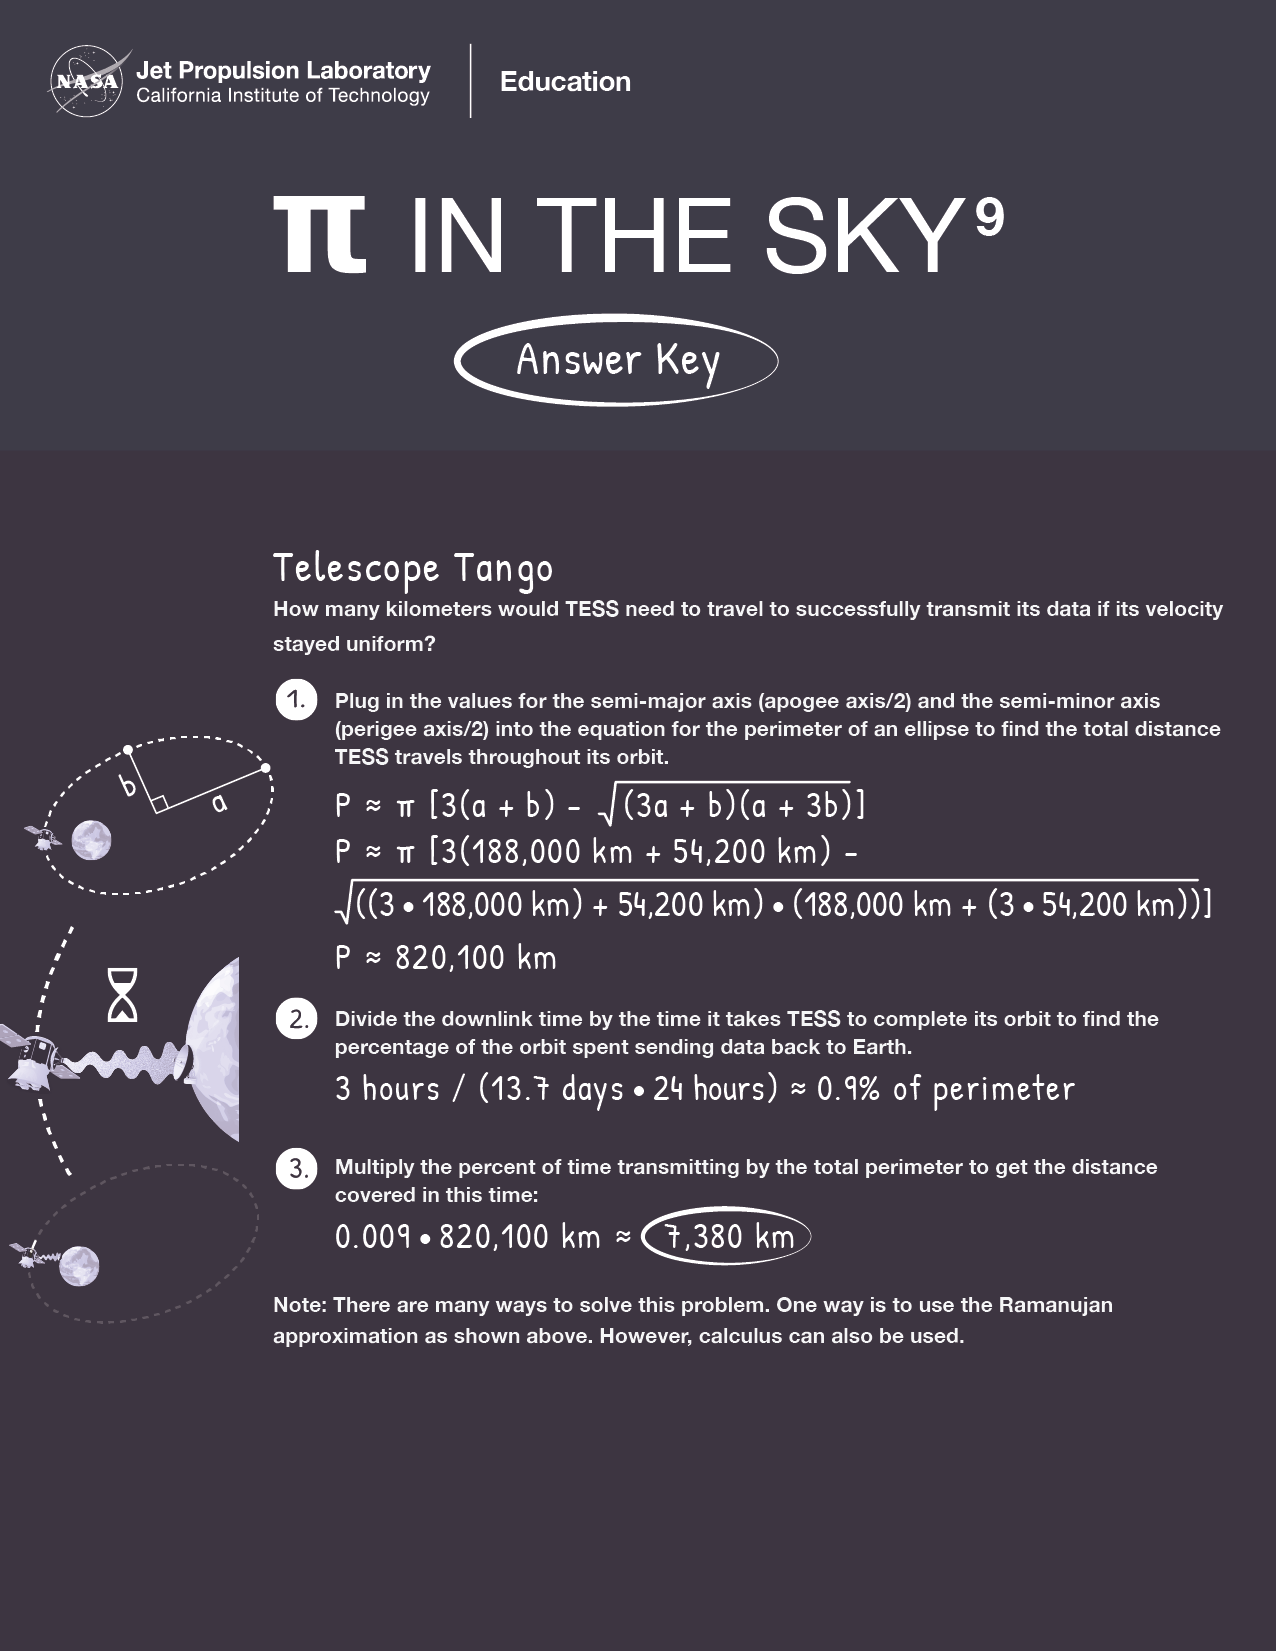 Illustrated answer key for the Telescope Tango problem